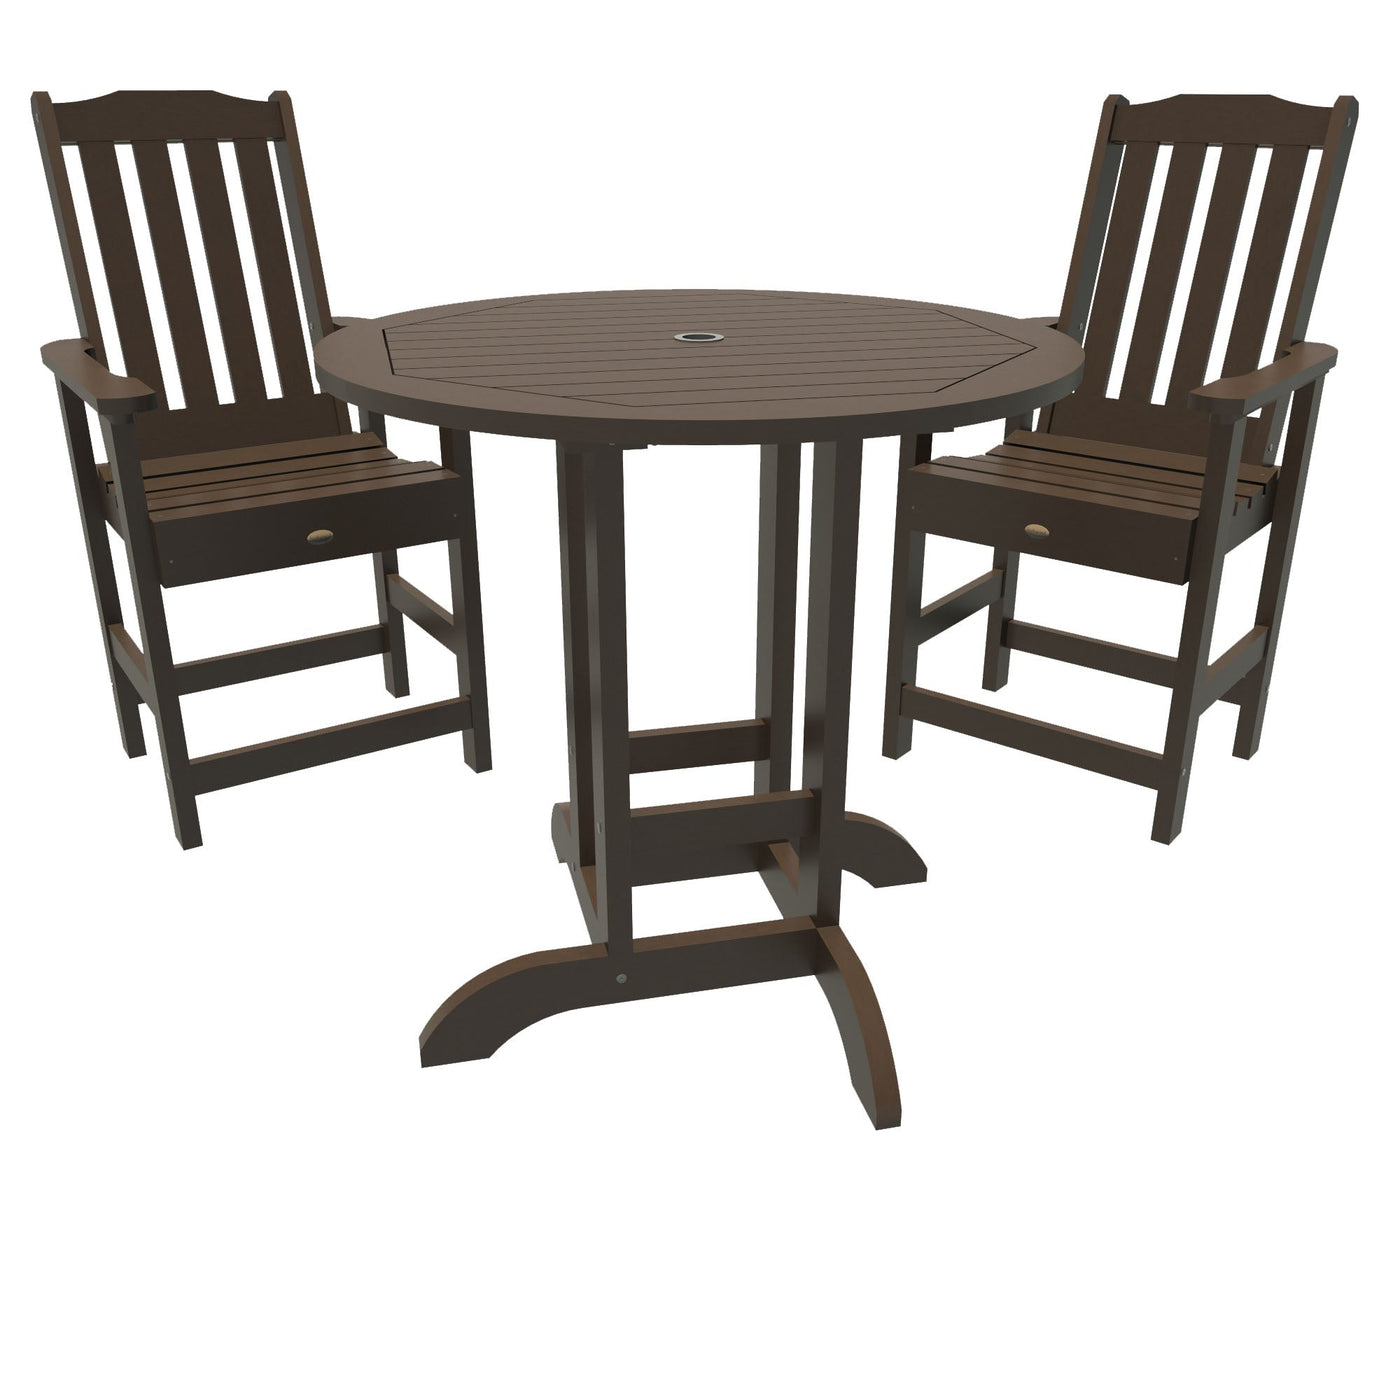 Lehigh 3pc 36in Round Dining Set - Counter Height Dining Highwood USA Weathered Acorn 